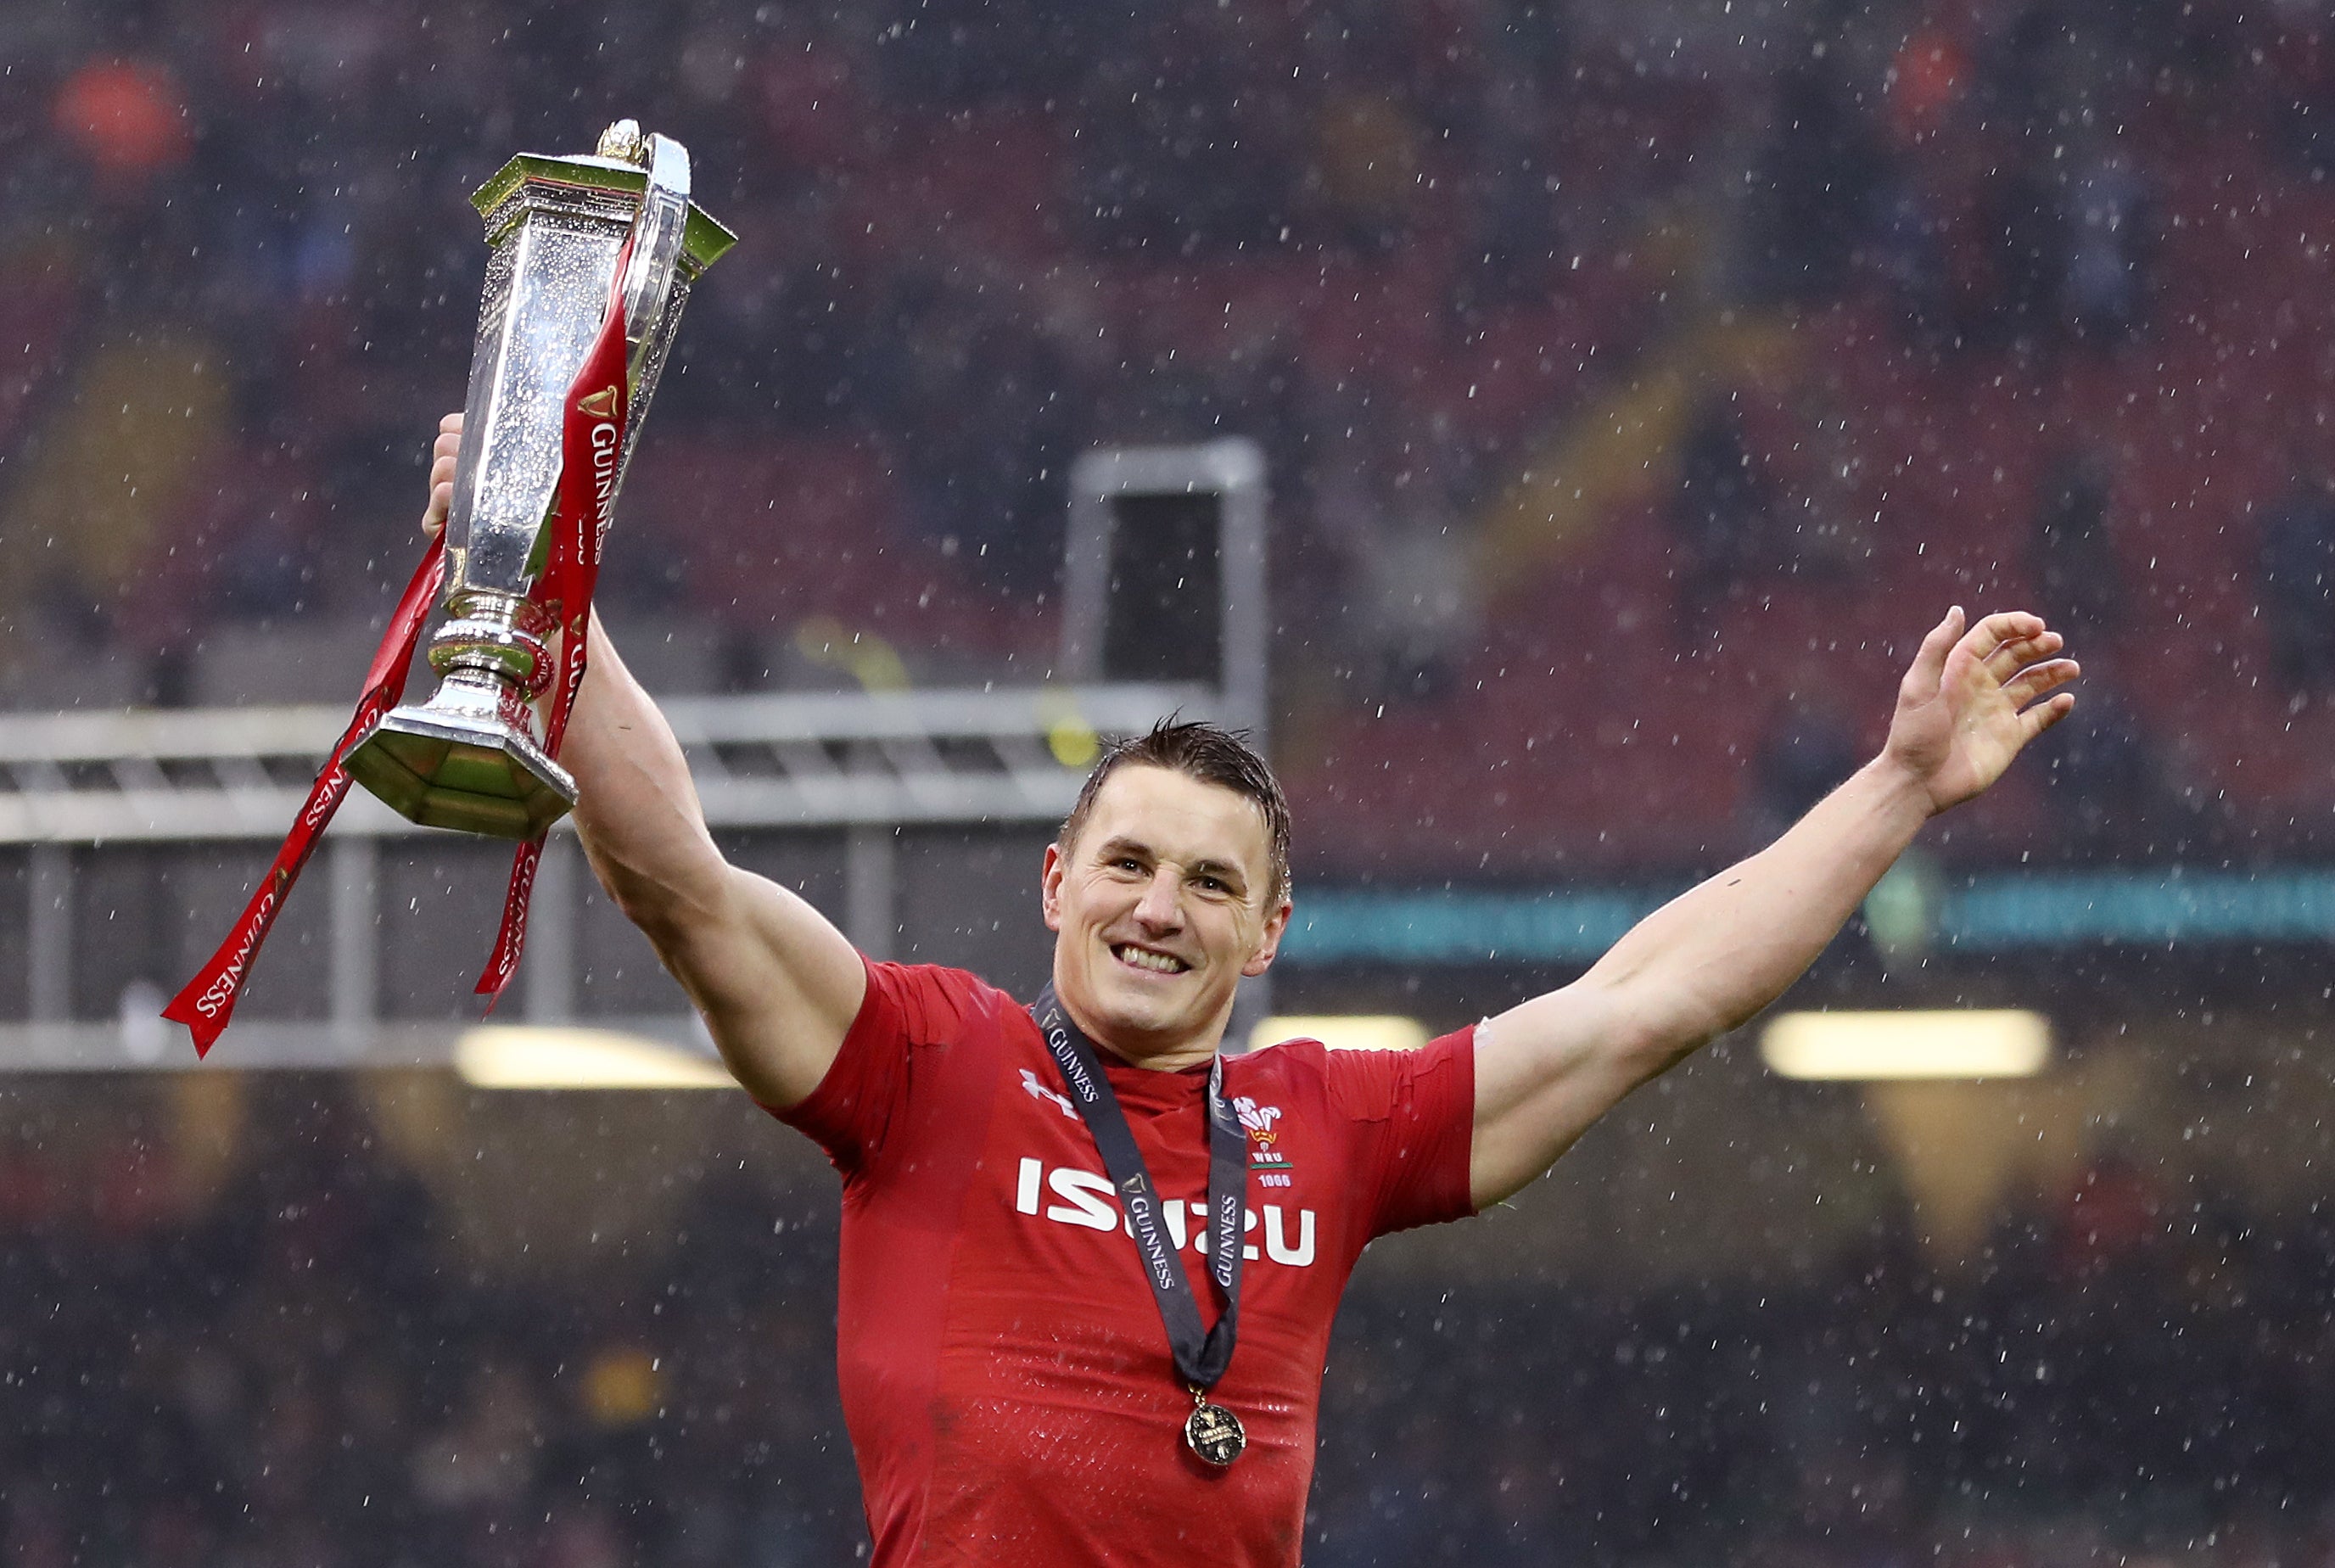 Wales star has overcome serious injuries to remain a major force